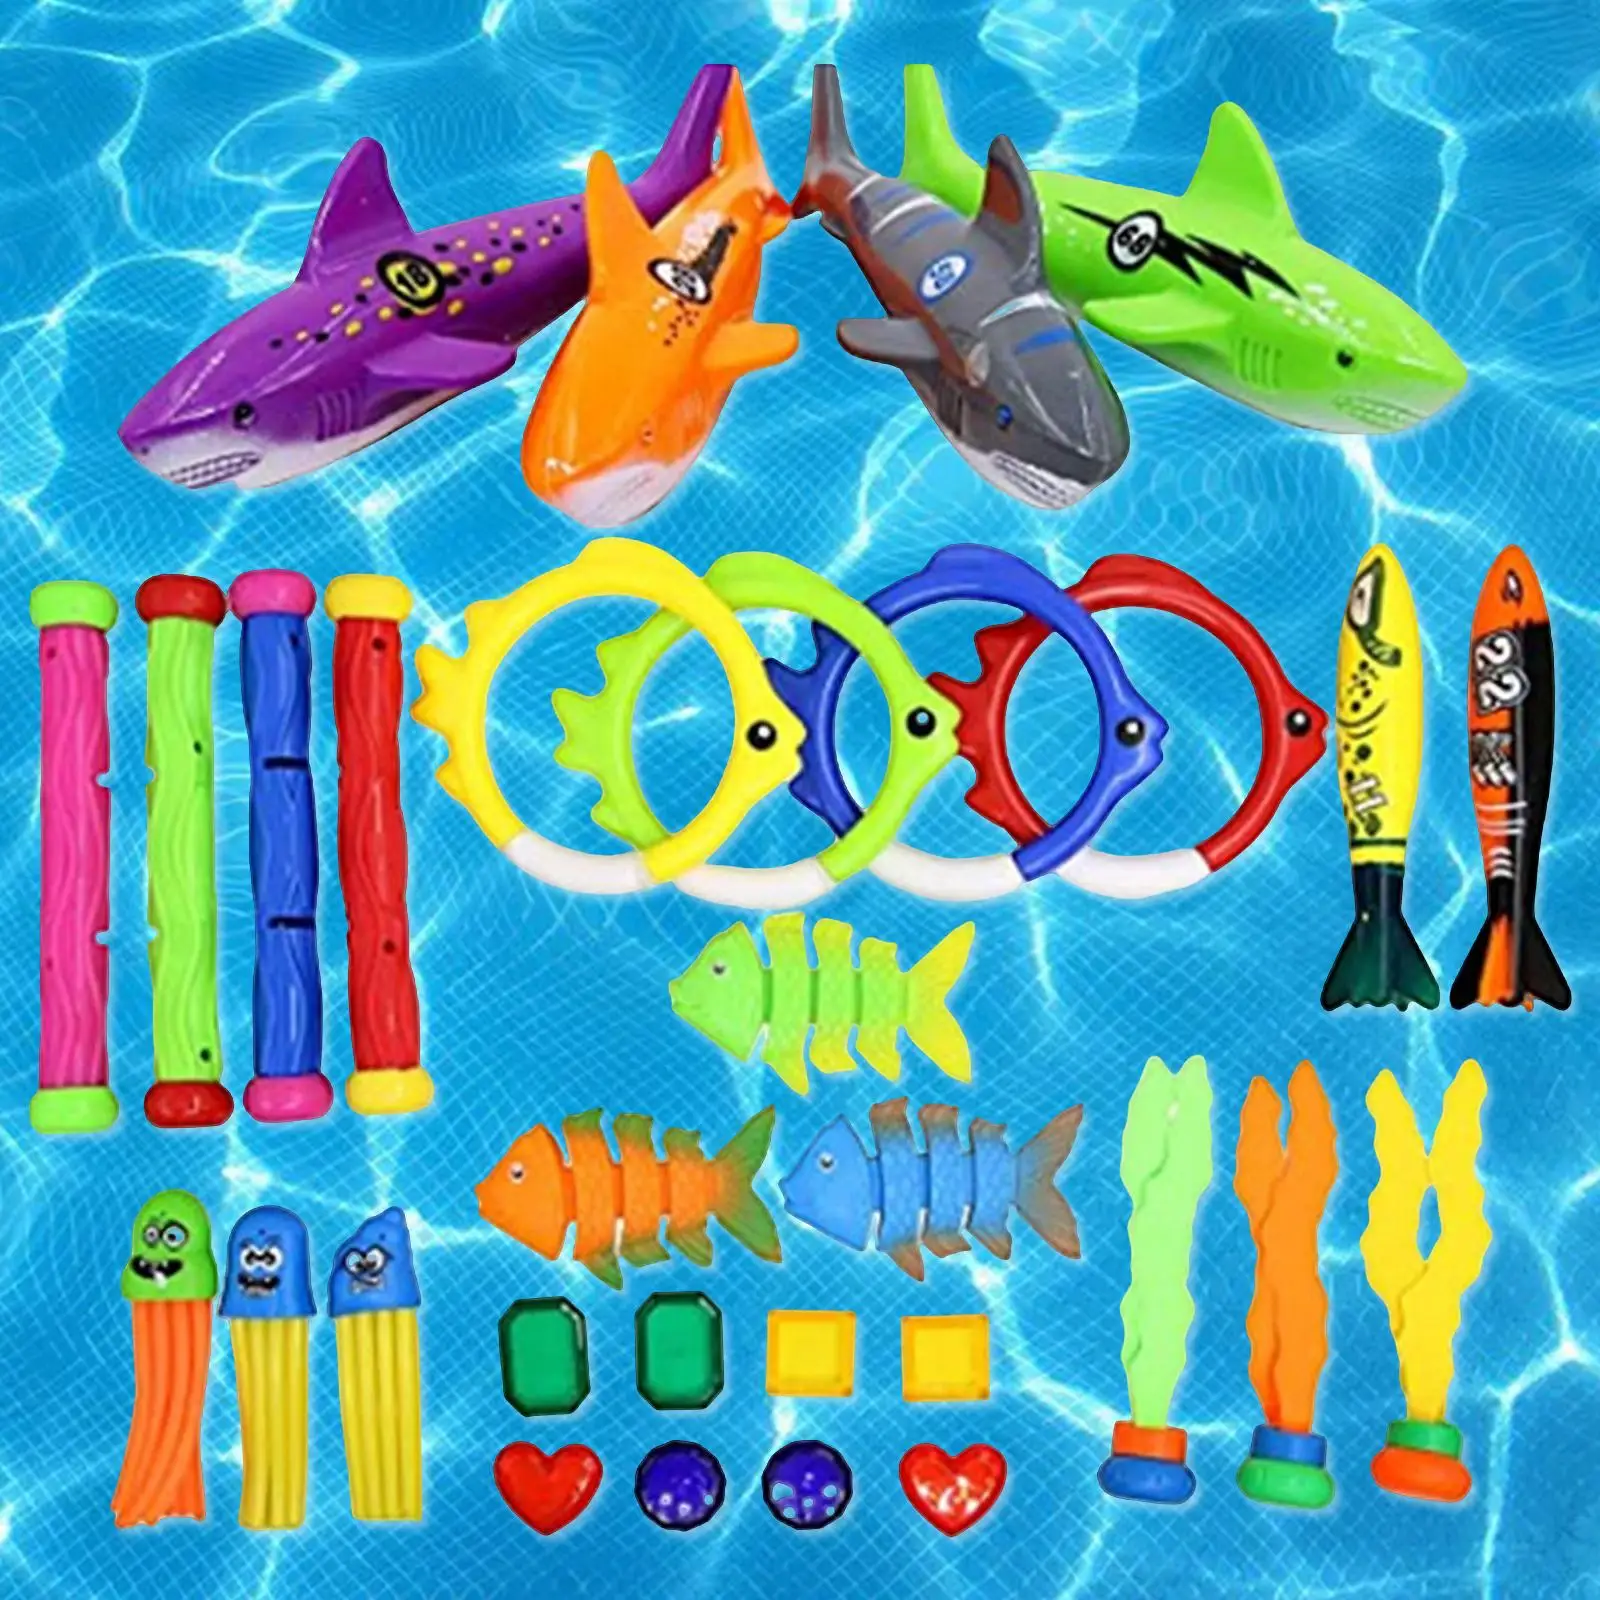 Funny Diving Pool Toys Included Sparkling Gems Swimming Pool Toys for Kids